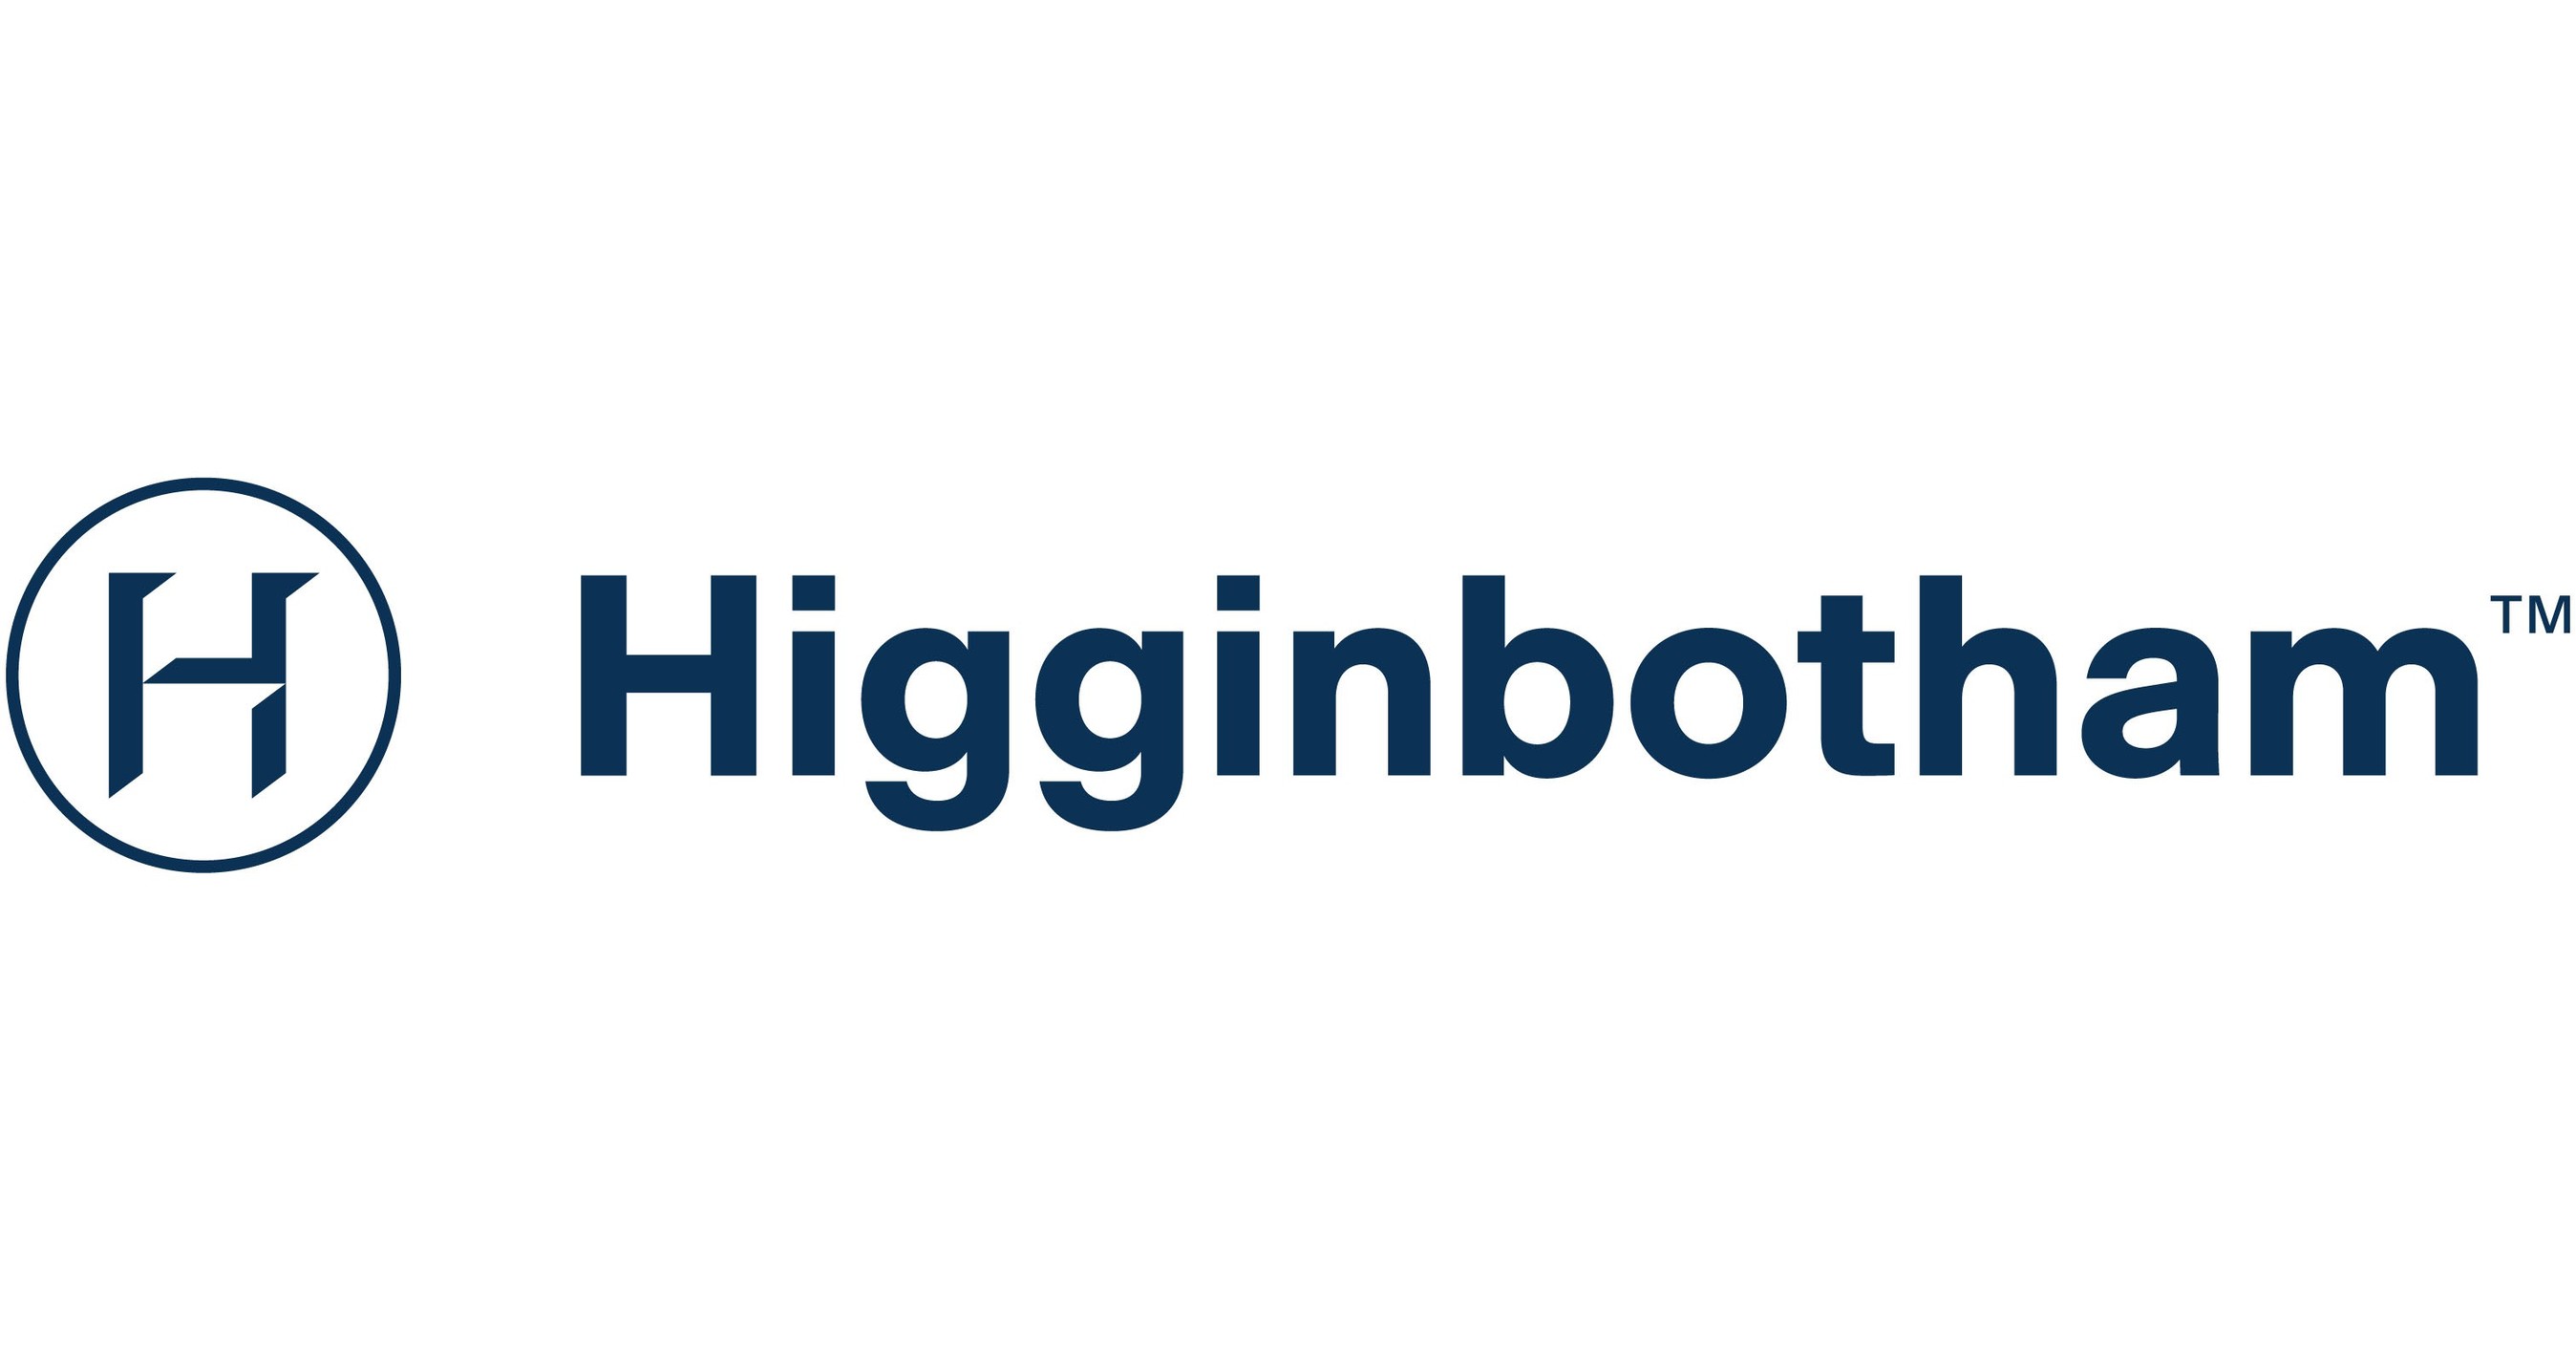 Higginbotham Enters Missouri by Joining Forces with Connell Insurance